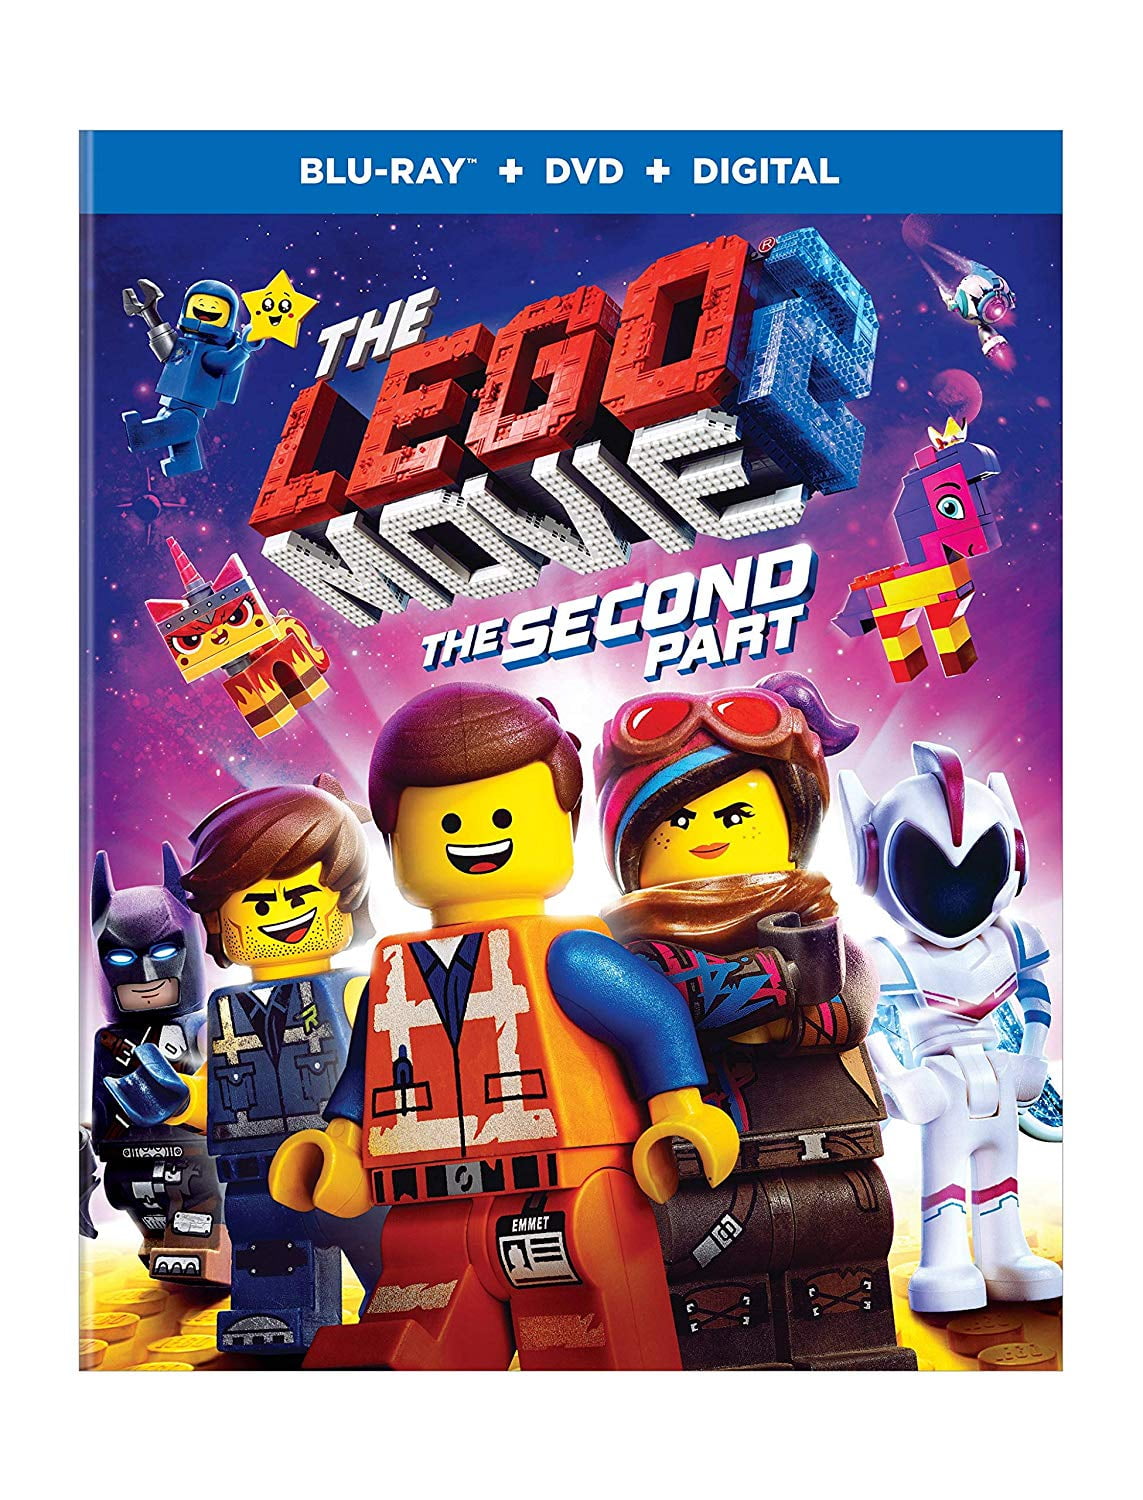 Hilsen absorberende Shipwreck The LEGO Movie 2 The Second Part (Blu-ray + DVD + ) - Walmart.com